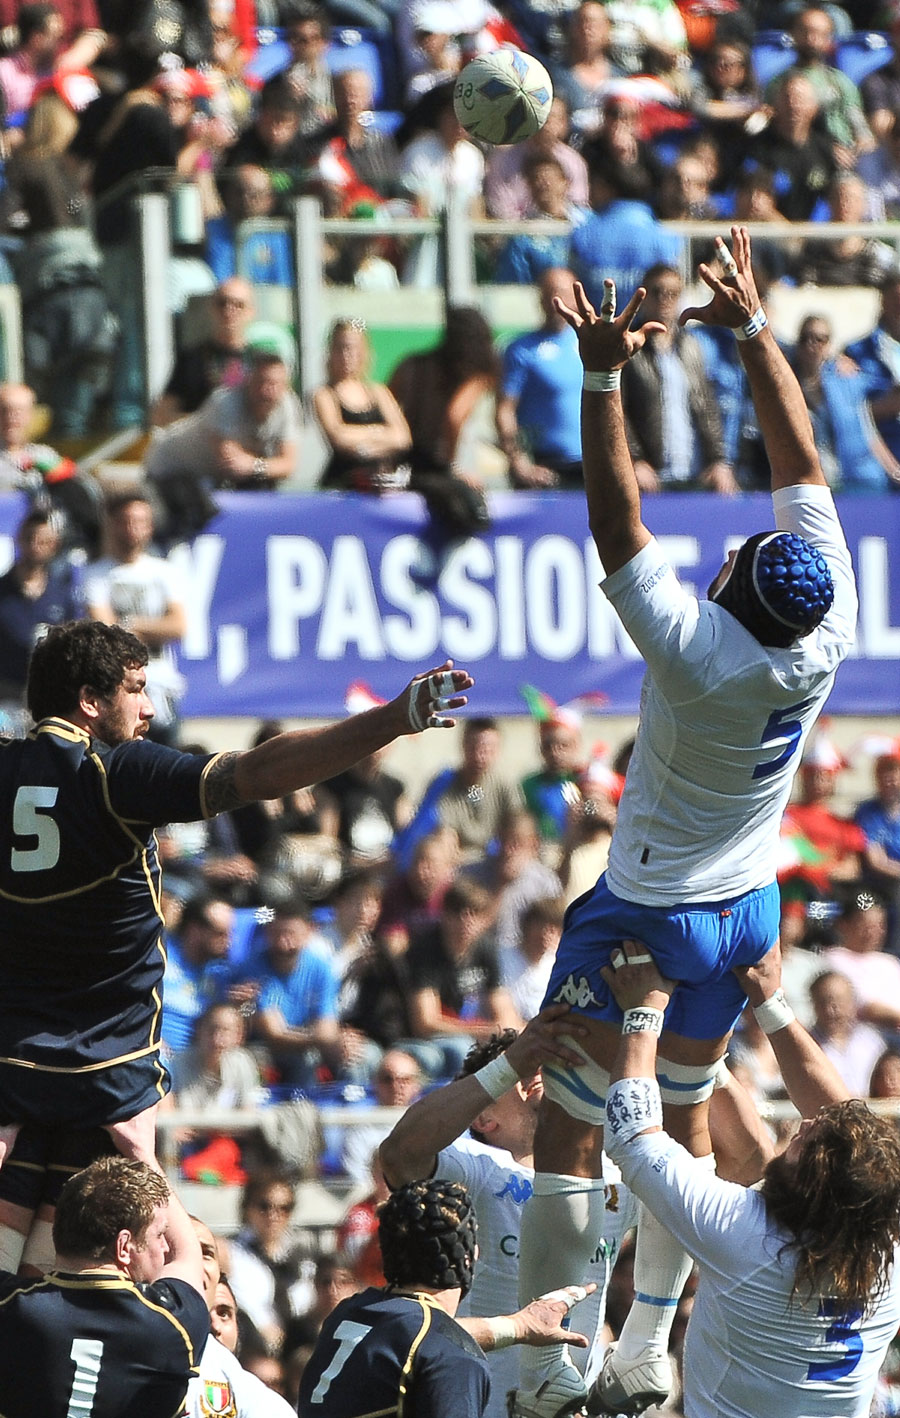 Italy's Marco Bortolami stretches for a lineout